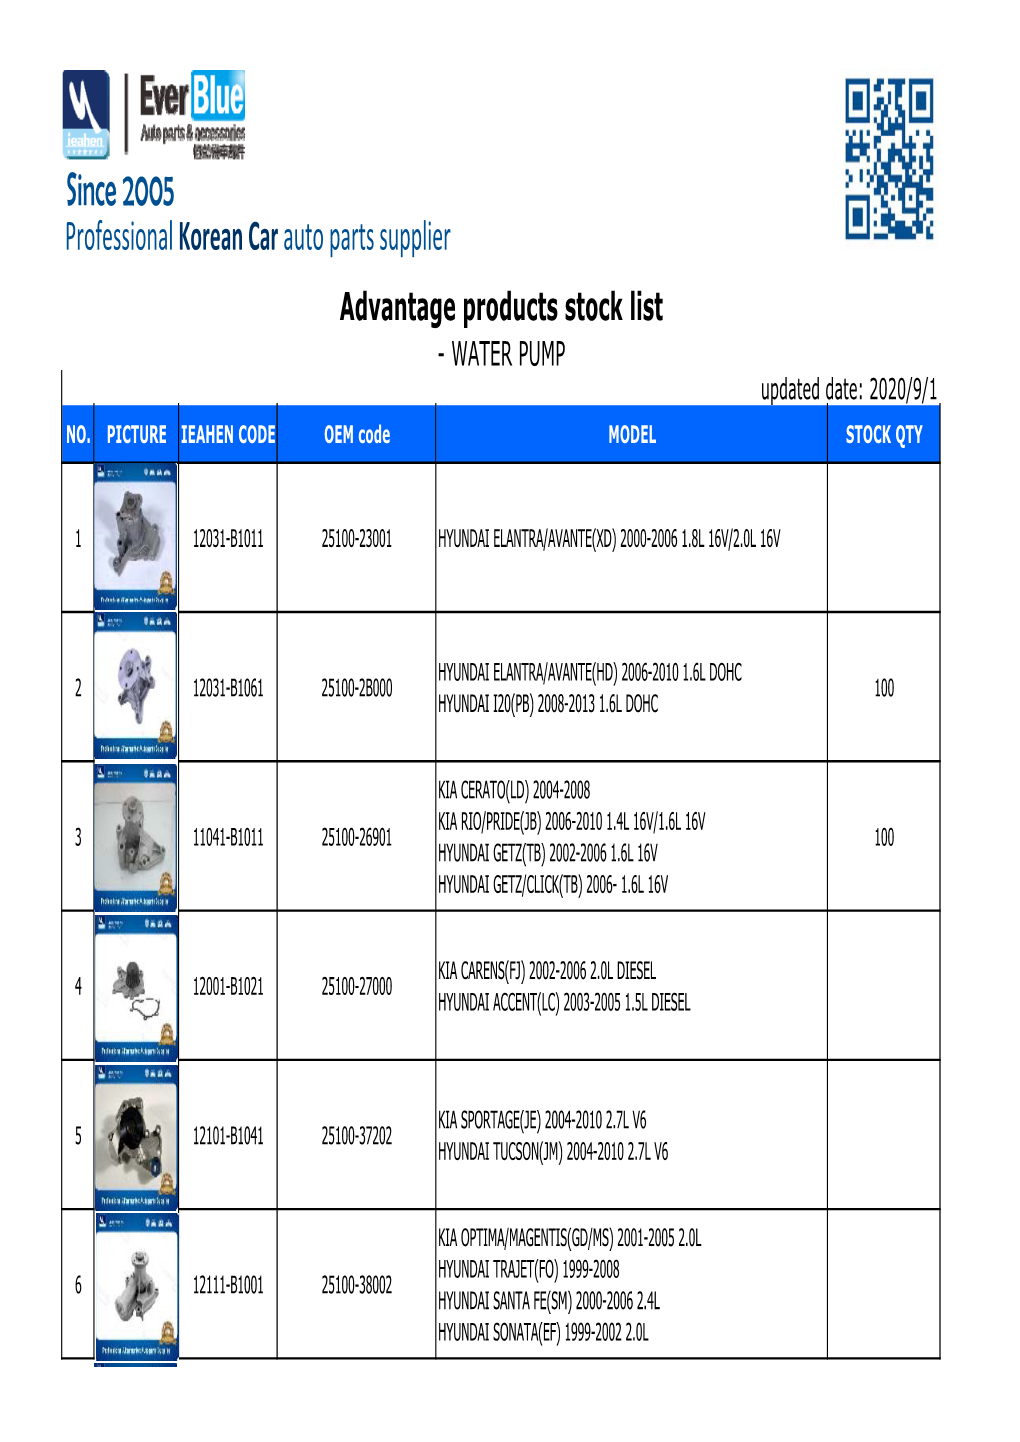 Since 2005 Professional Korean Car Auto Parts Supplier Advantage Products Stock List -WATERPUMP Updated Date: 2020/9/1 NO